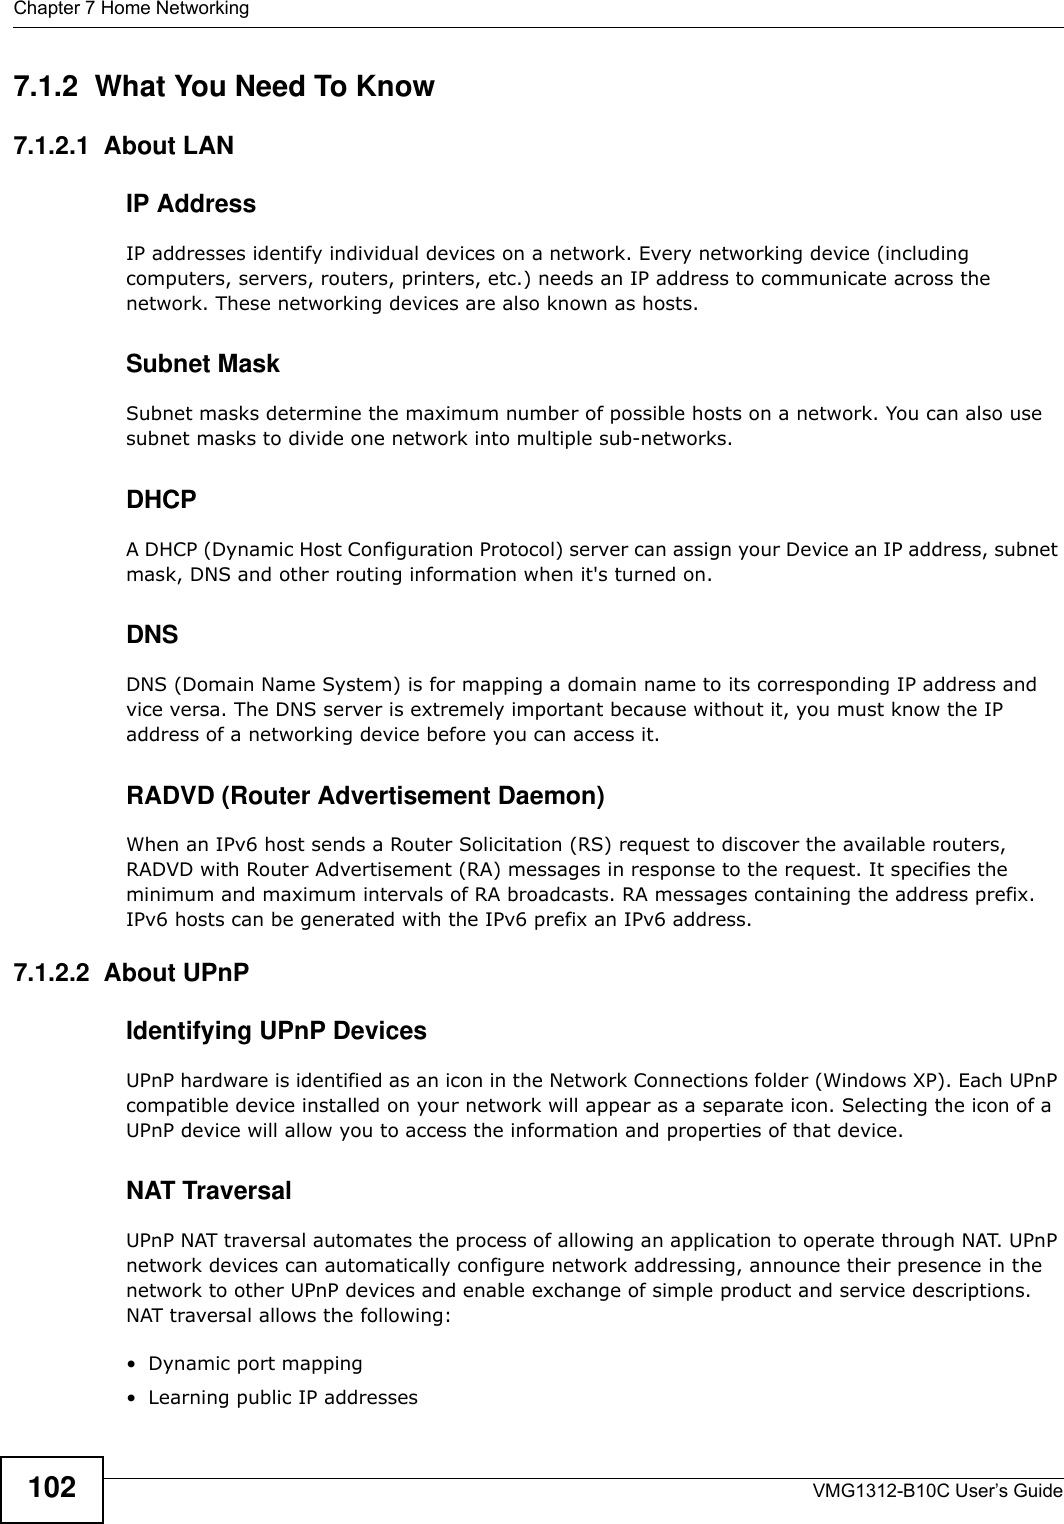 Chapter 7 Home NetworkingVMG1312-B10C User’s Guide1027.1.2  What You Need To Know7.1.2.1  About LANIP AddressIP addresses identify individual devices on a network. Every networking device (including computers, servers, routers, printers, etc.) needs an IP address to communicate across the network. These networking devices are also known as hosts.Subnet MaskSubnet masks determine the maximum number of possible hosts on a network. You can also use subnet masks to divide one network into multiple sub-networks.DHCPA DHCP (Dynamic Host Configuration Protocol) server can assign your Device an IP address, subnet mask, DNS and other routing information when it&apos;s turned on.DNSDNS (Domain Name System) is for mapping a domain name to its corresponding IP address and vice versa. The DNS server is extremely important because without it, you must know the IP address of a networking device before you can access it.RADVD (Router Advertisement Daemon)When an IPv6 host sends a Router Solicitation (RS) request to discover the available routers, RADVD with Router Advertisement (RA) messages in response to the request. It specifies the minimum and maximum intervals of RA broadcasts. RA messages containing the address prefix. IPv6 hosts can be generated with the IPv6 prefix an IPv6 address.7.1.2.2  About UPnPIdentifying UPnP DevicesUPnP hardware is identified as an icon in the Network Connections folder (Windows XP). Each UPnP compatible device installed on your network will appear as a separate icon. Selecting the icon of a UPnP device will allow you to access the information and properties of that device. NAT TraversalUPnP NAT traversal automates the process of allowing an application to operate through NAT. UPnP network devices can automatically configure network addressing, announce their presence in the network to other UPnP devices and enable exchange of simple product and service descriptions. NAT traversal allows the following:• Dynamic port mapping• Learning public IP addresses